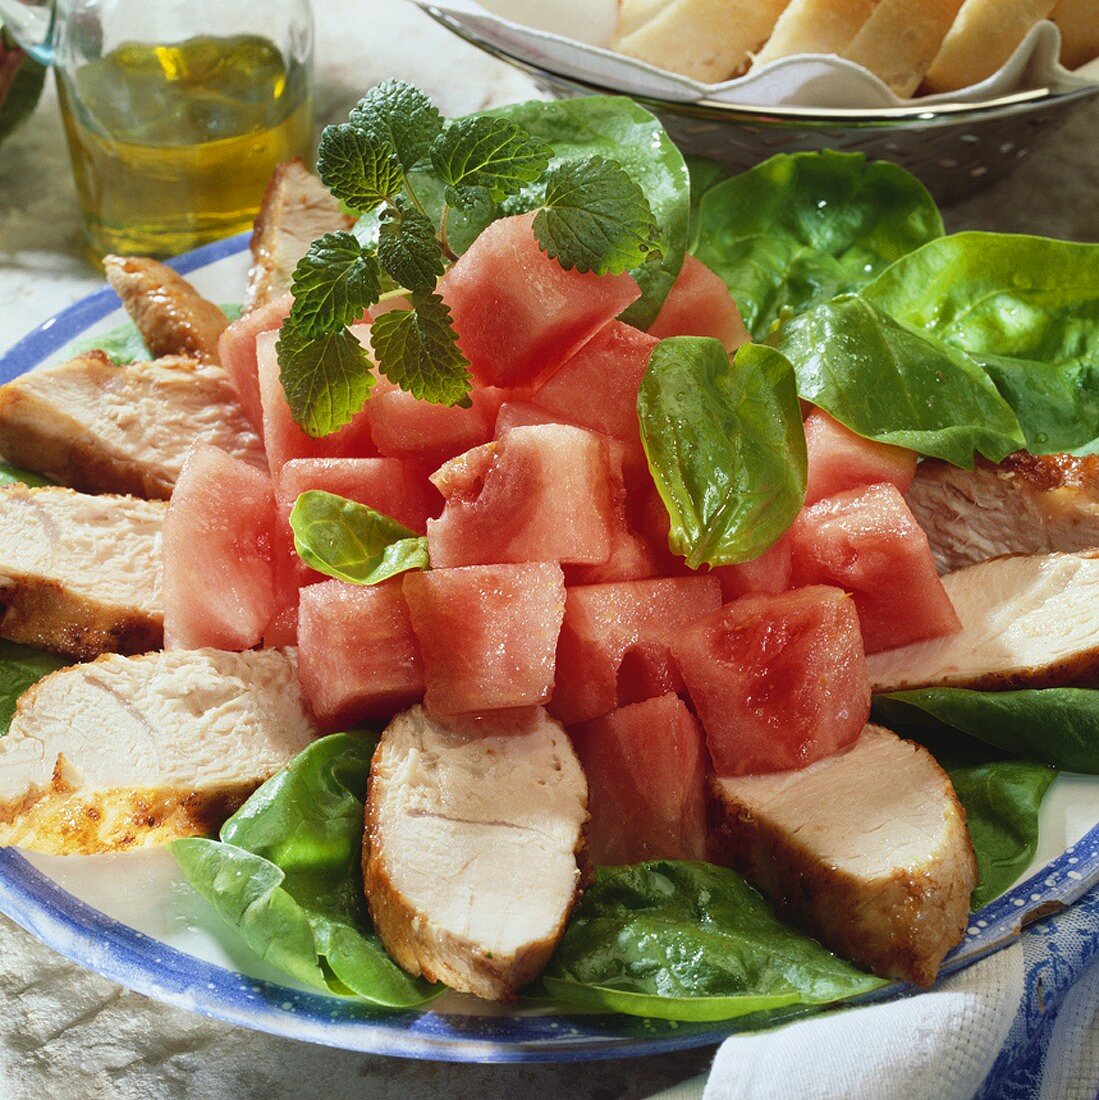 Chicken breast with spinach salad and melon